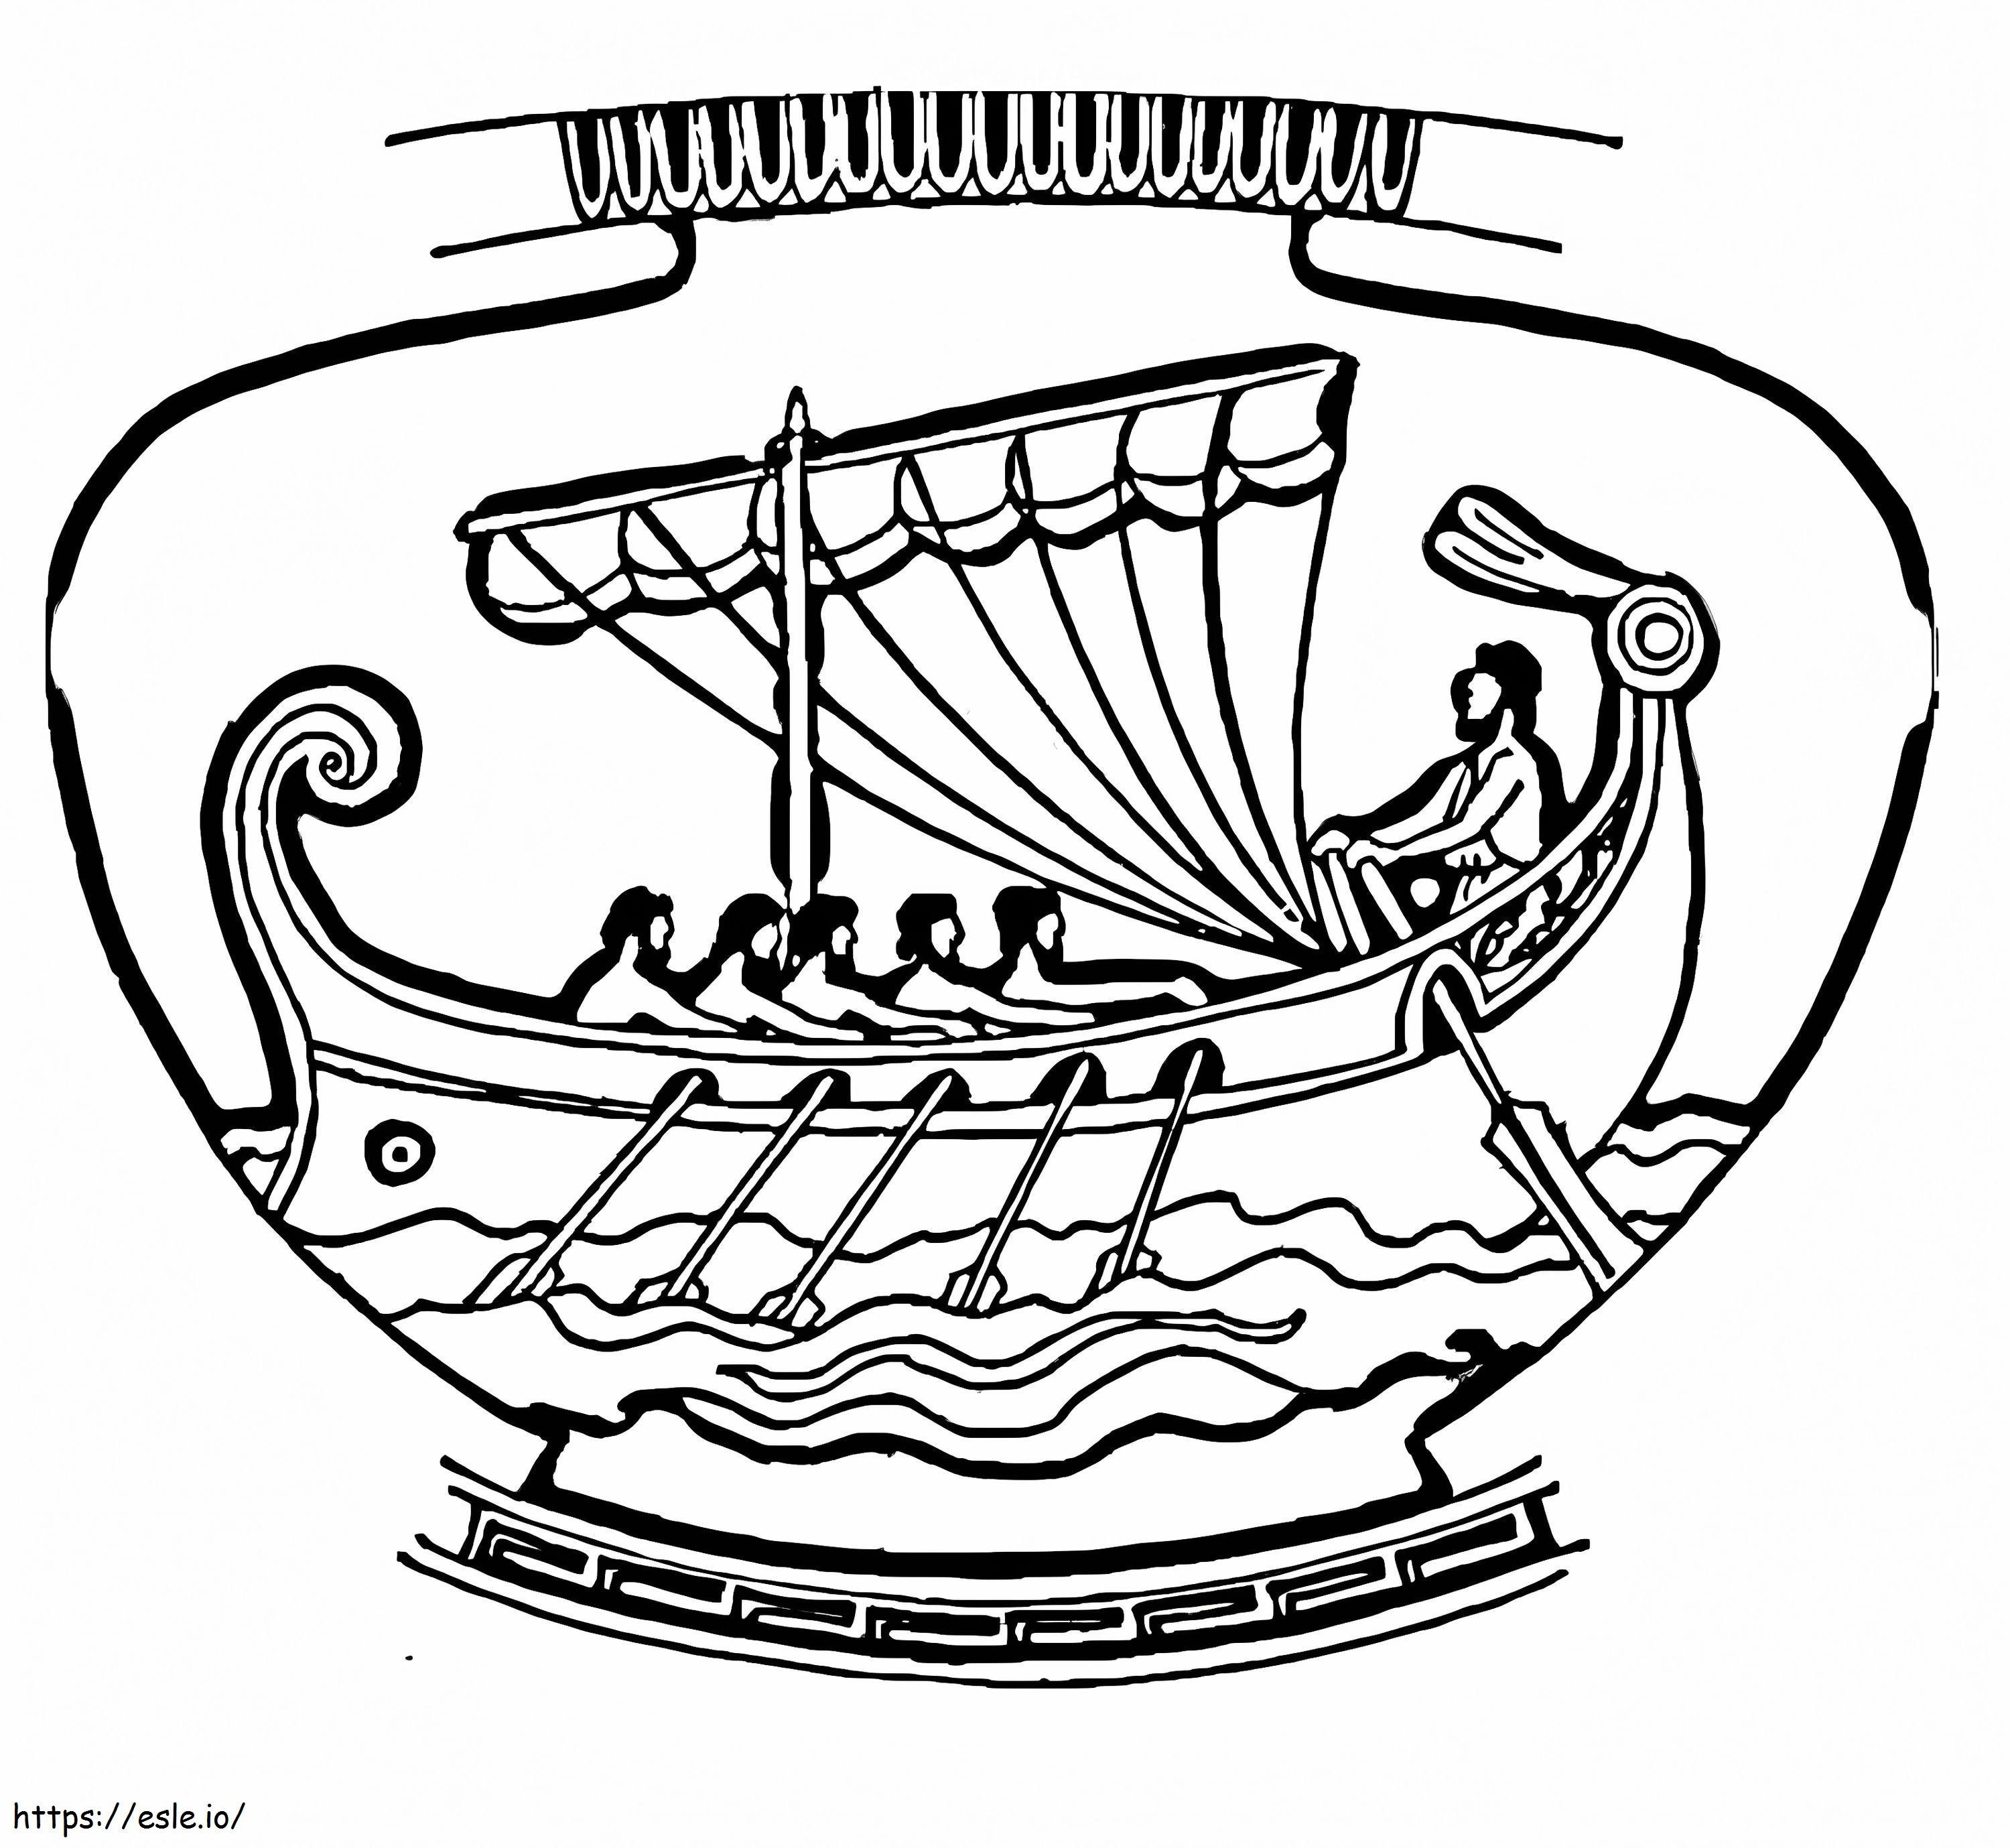 Vase With Ship Ornament coloring page